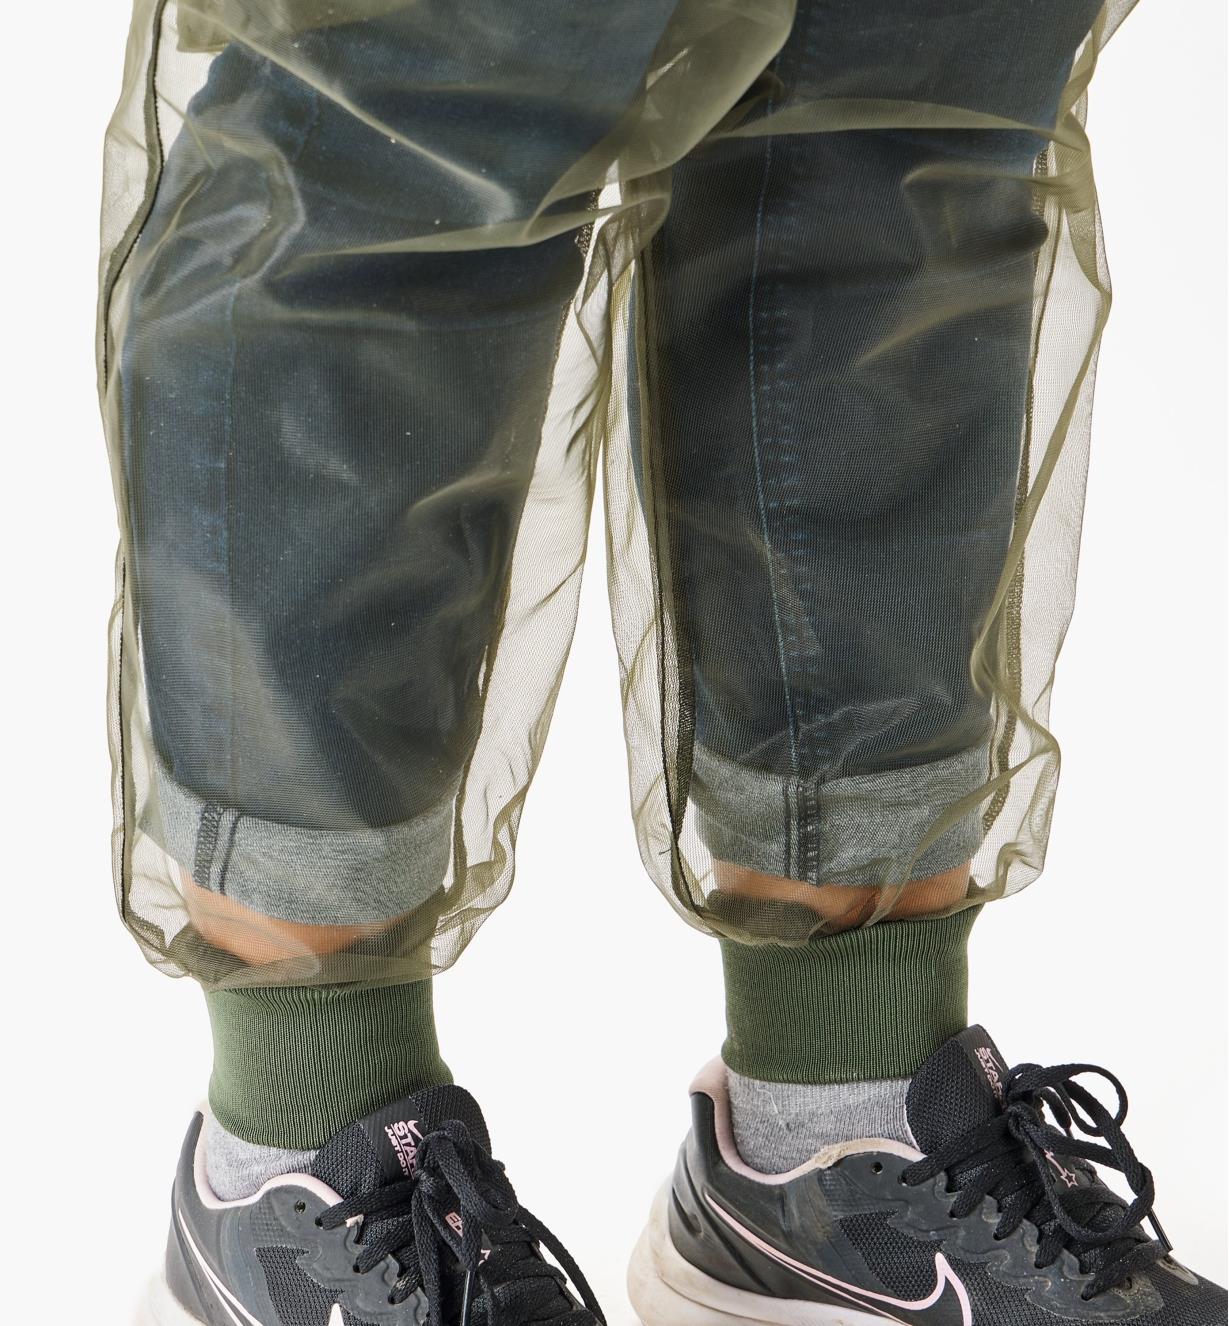 A close-up view of the rib-knit ankle cuffs on a pair of bug-protection pants worn by a woman